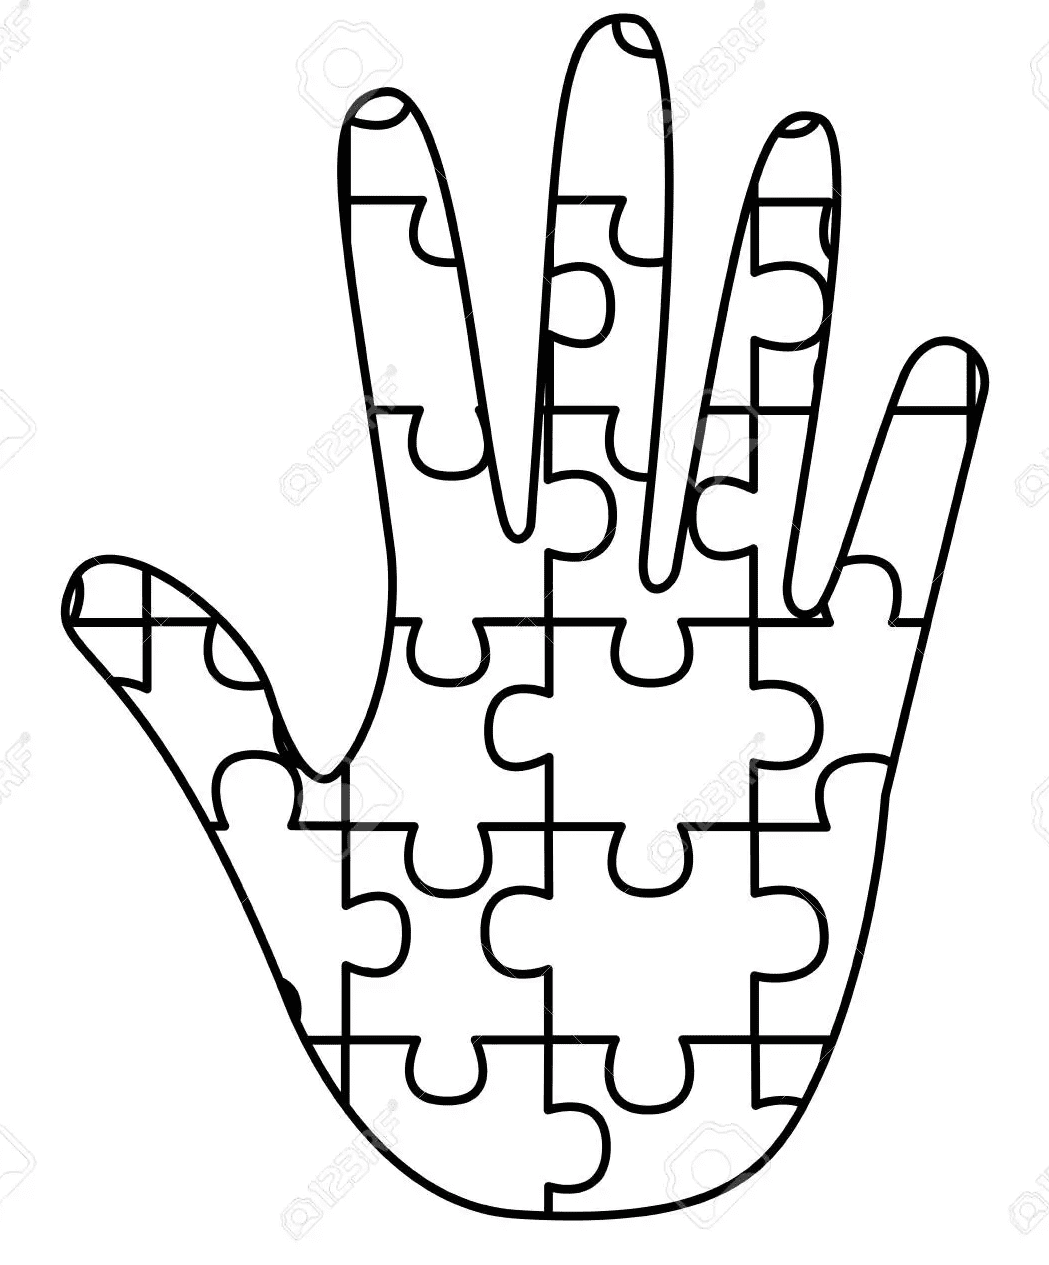 Hand Puzzle Pieces For Autism Awareness Coloring Page